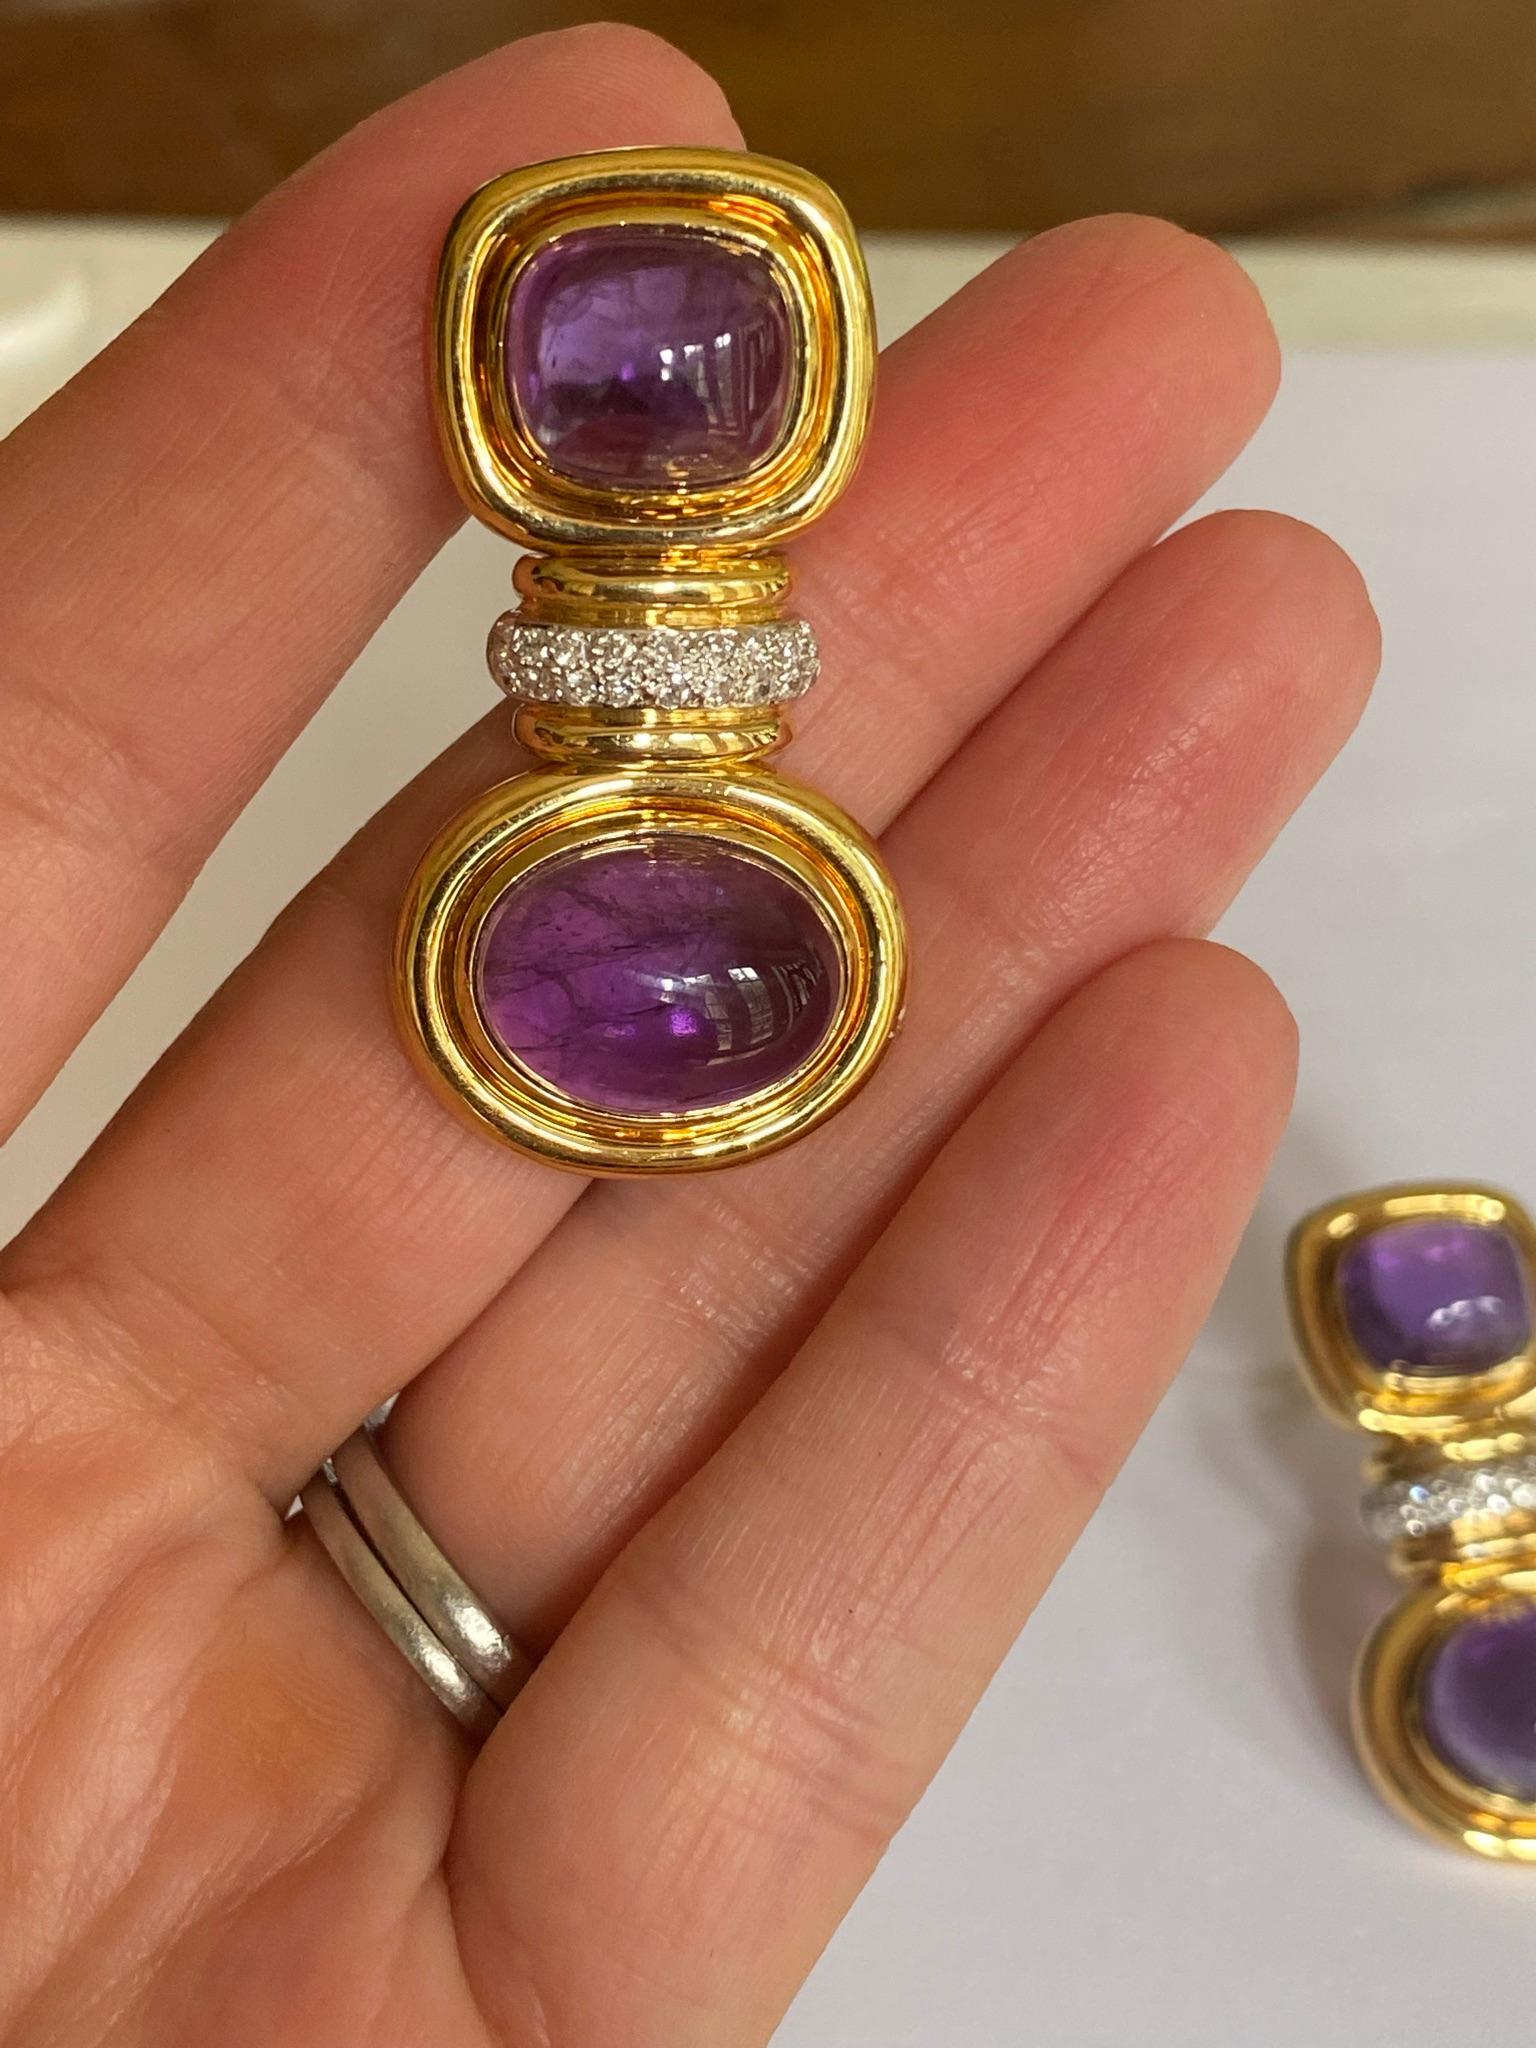 These Estate fashion earrings each feature an oval and a cushion cabochon purple amethyst encased in 18kt yellow gold separated by eighteen round diamonds and secured with omega backs. The earrings measure 1.5 inches long and weigh 27.1 grams. The